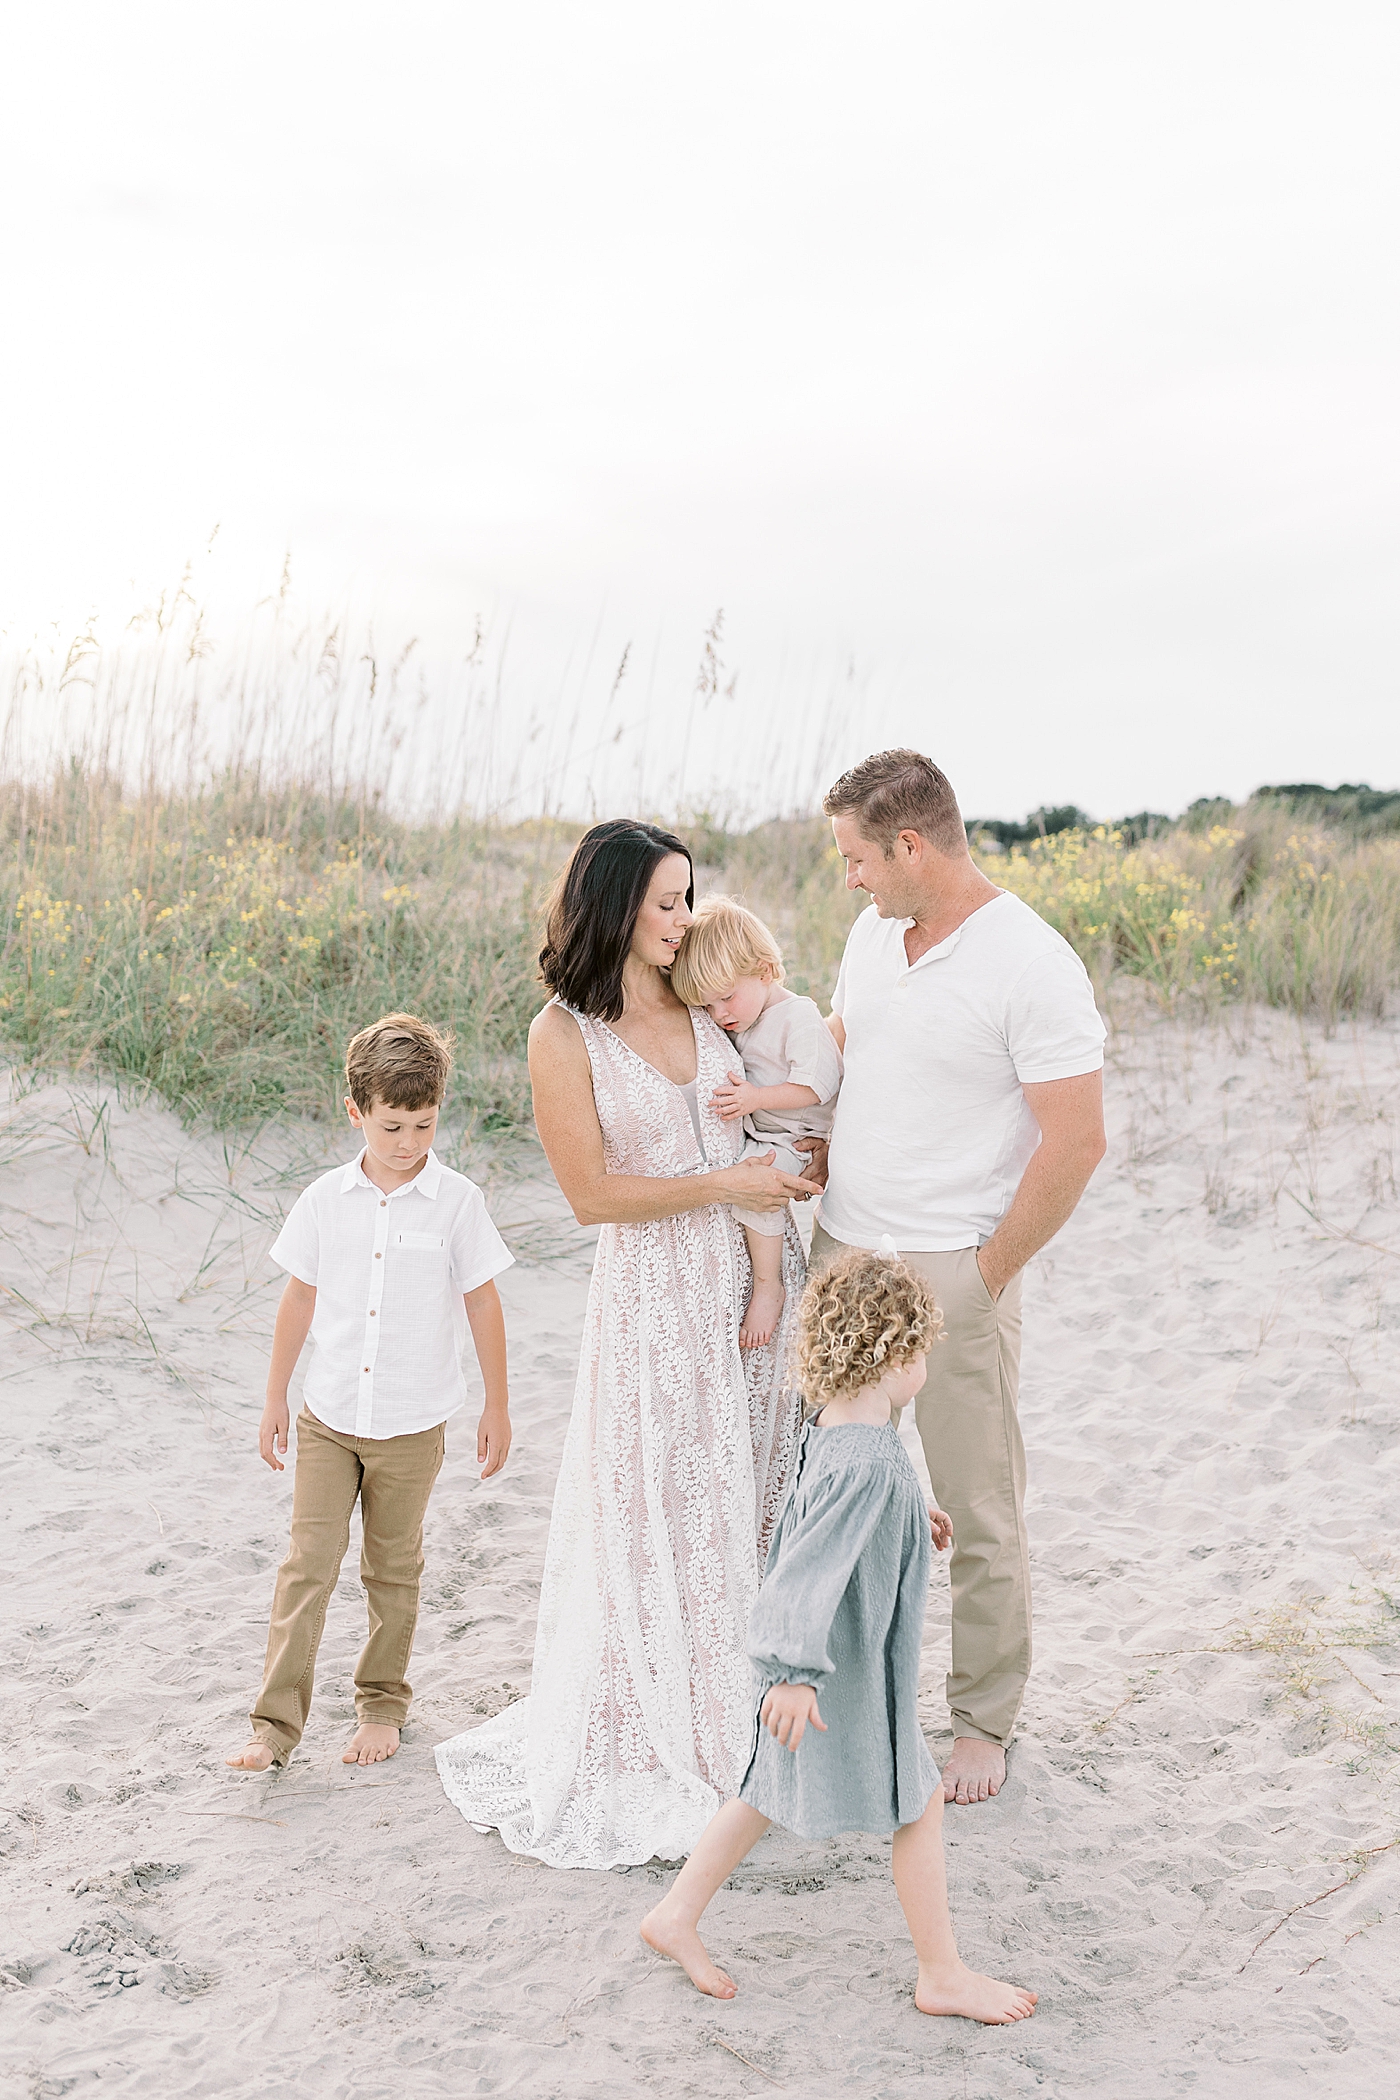 Family snuggling together during fall family session at beach | Photo by Caitlyn Motycka Photography